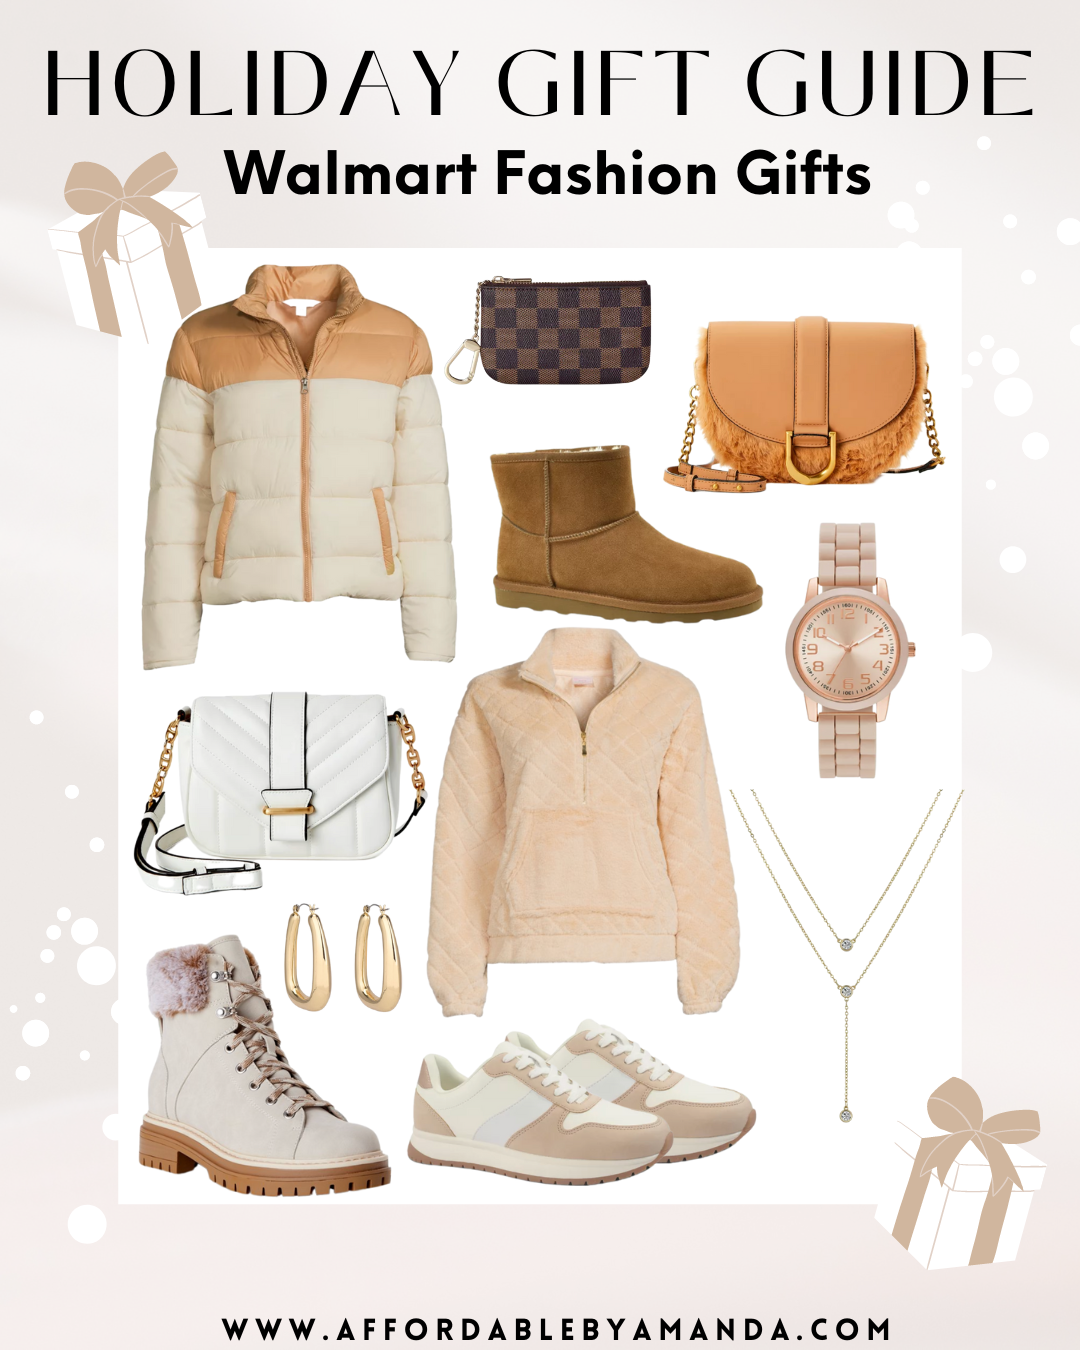 Christmas & Holiday Gift Guide – Walmart.com | Fashion Gifts from Walmart for Her 2022 | Walmart Gift Ideas for Her